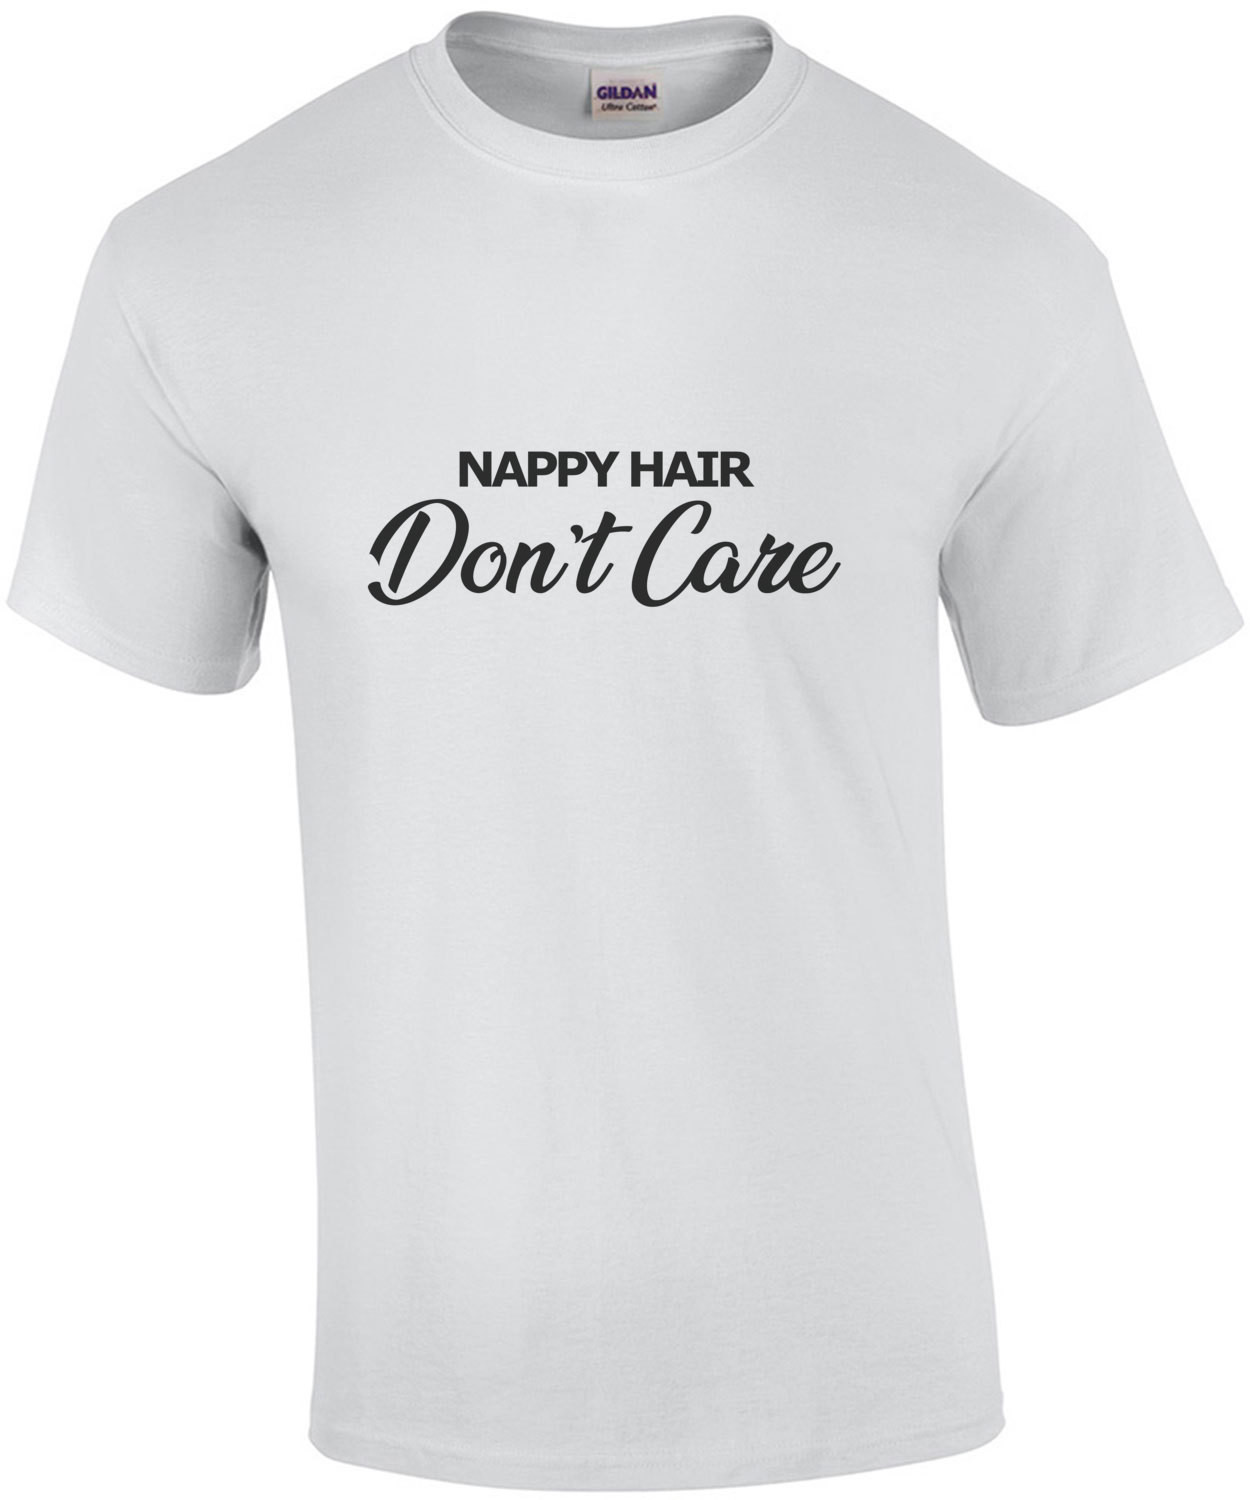 Nappy Hair - Don't Care - Ladies T-Shirt